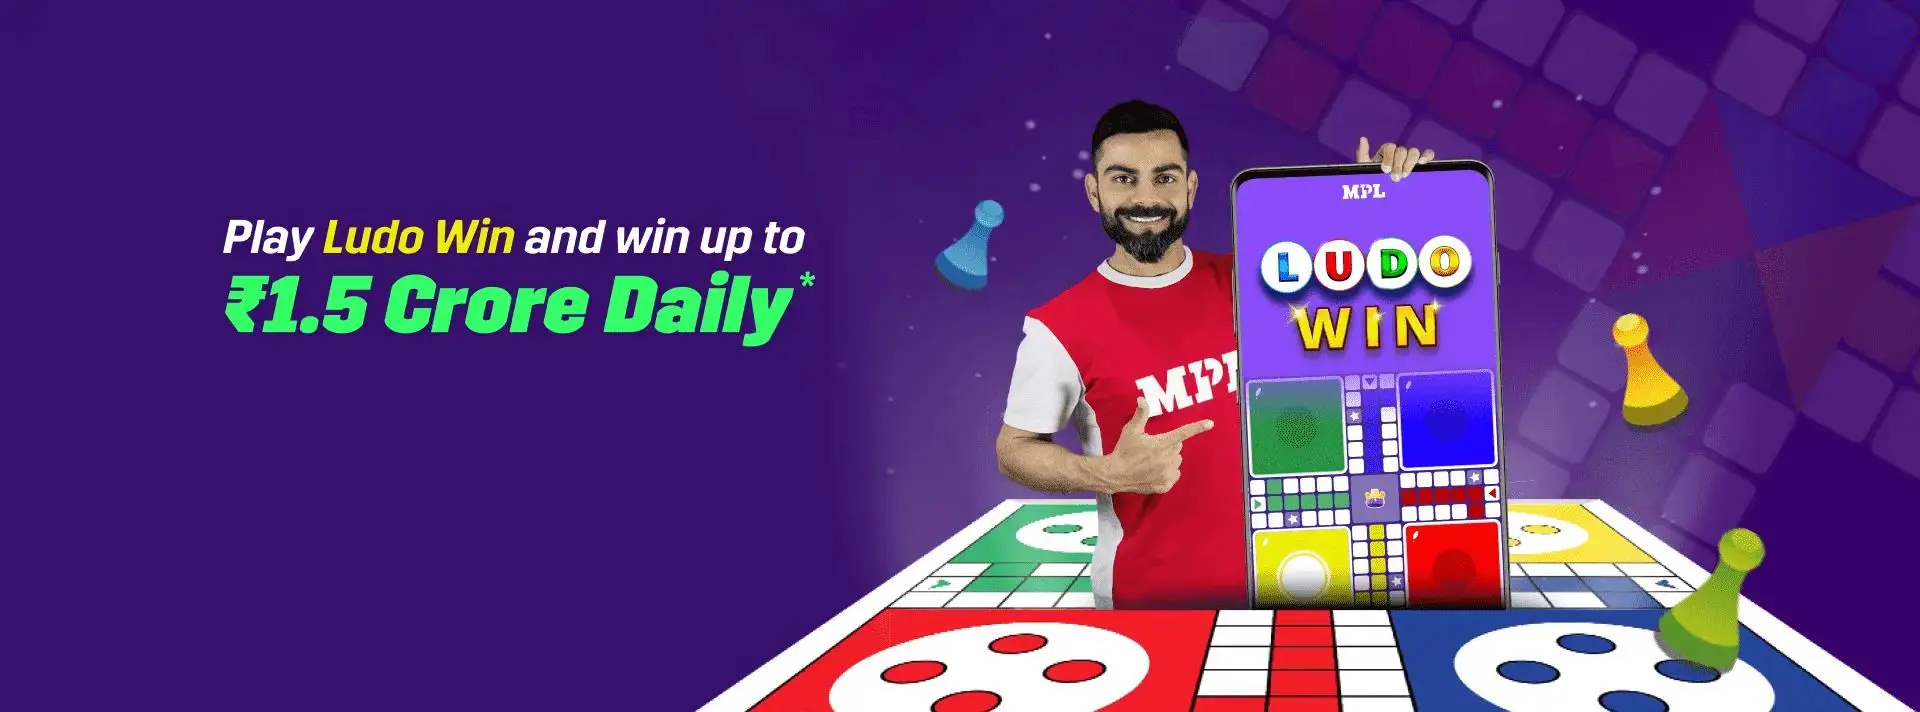 Ludo Win by MPL: Earn Money for Android - Free App Download